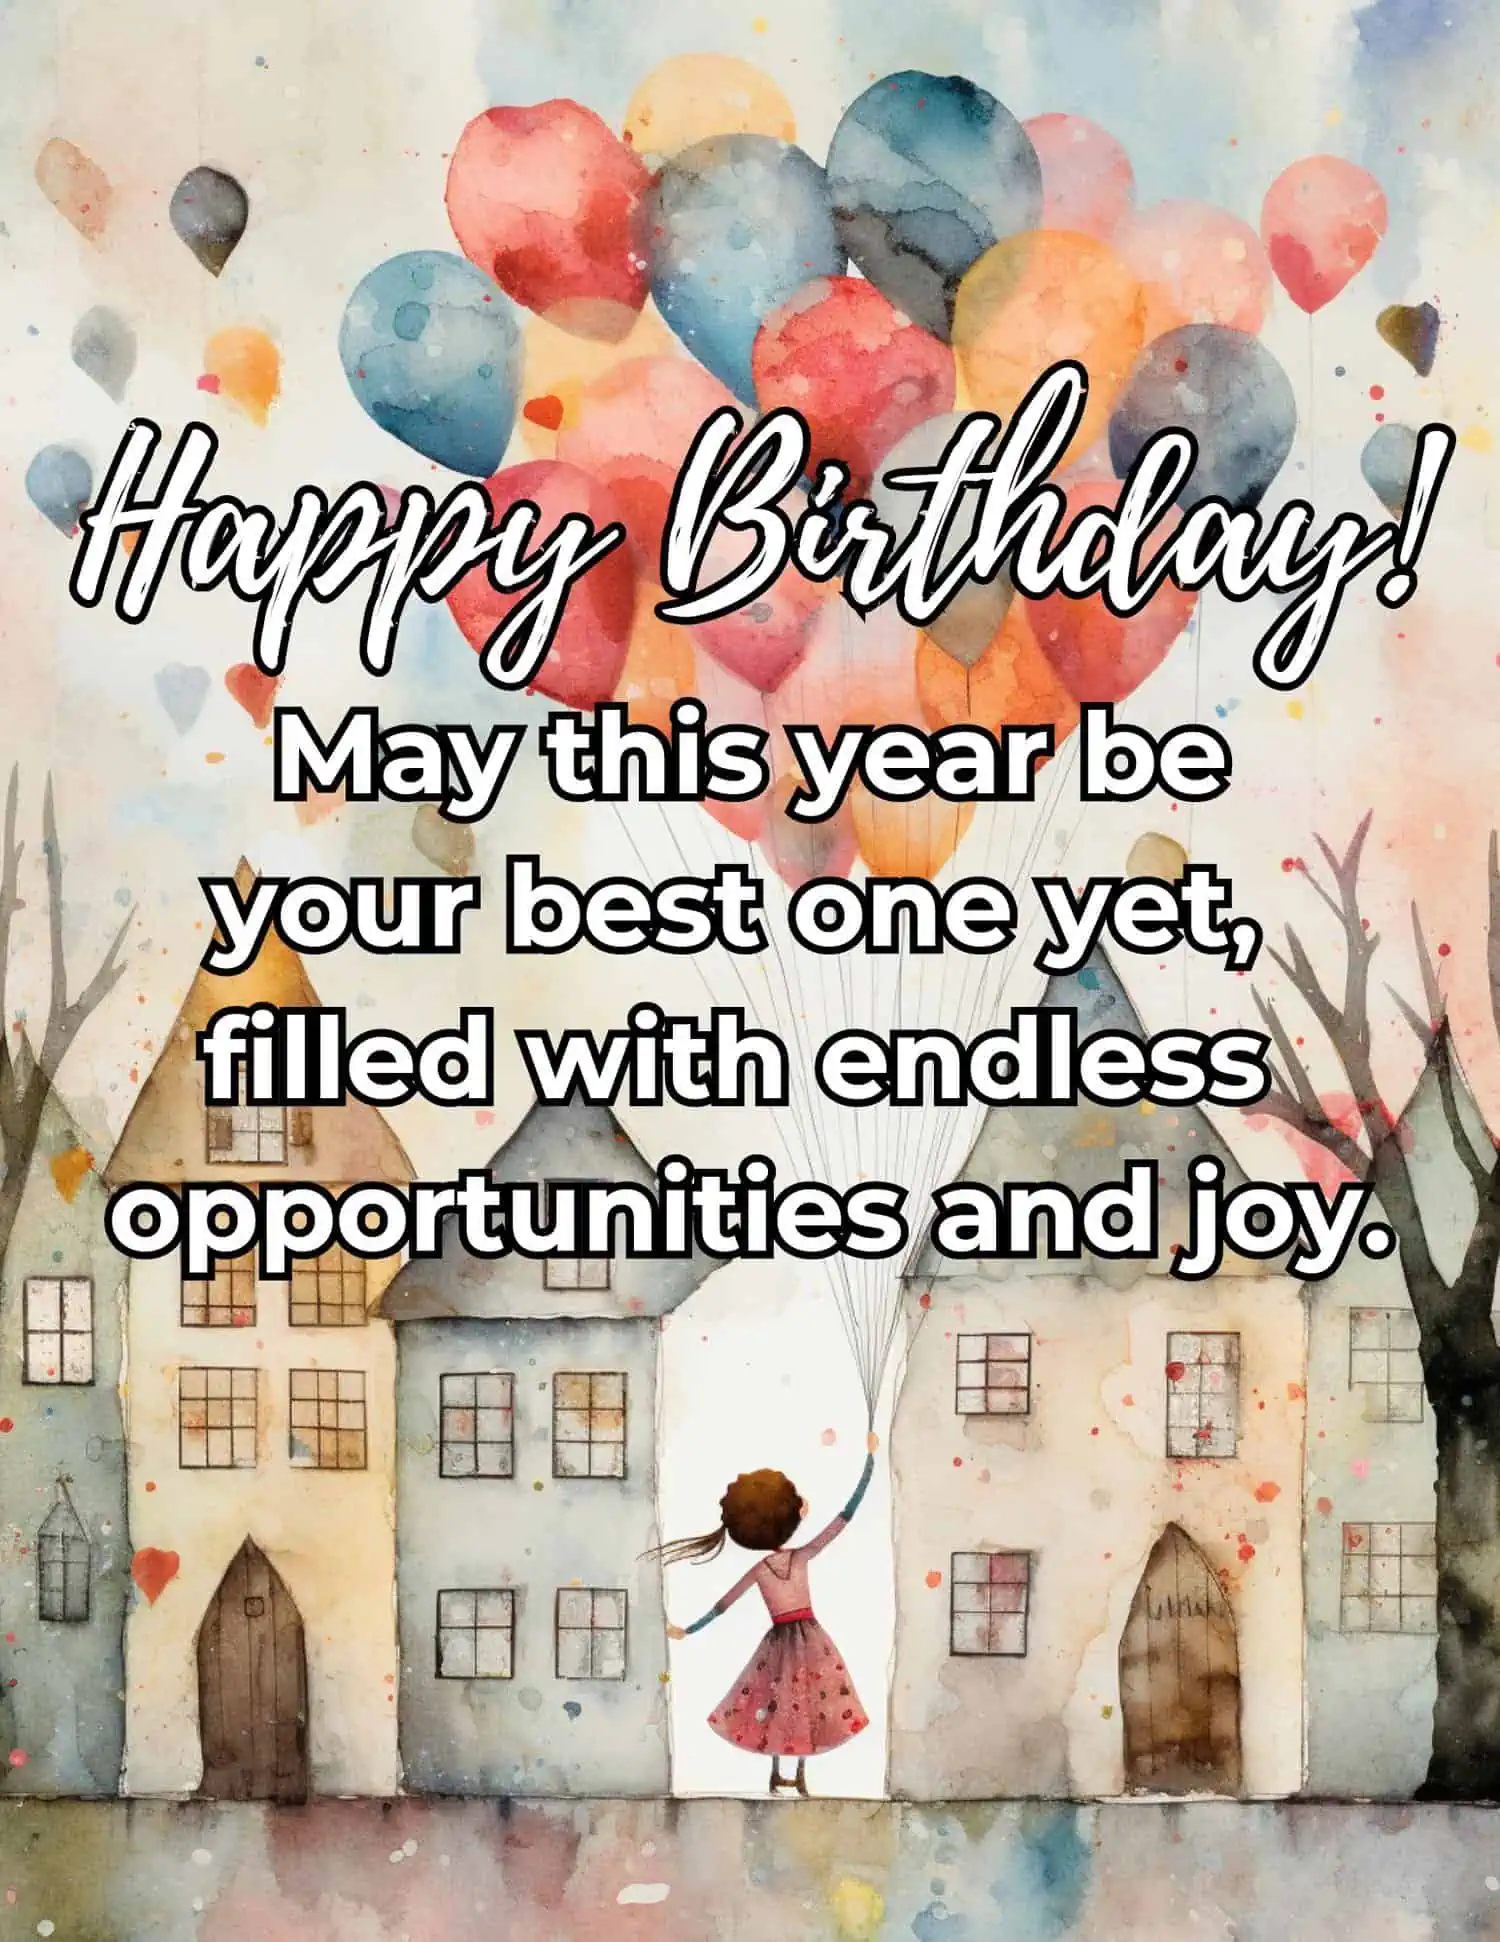 A collection of motivational and uplifting birthday wishes, perfect for inspiring an ex-girlfriend to embrace her special day and the year ahead with optimism and courage.